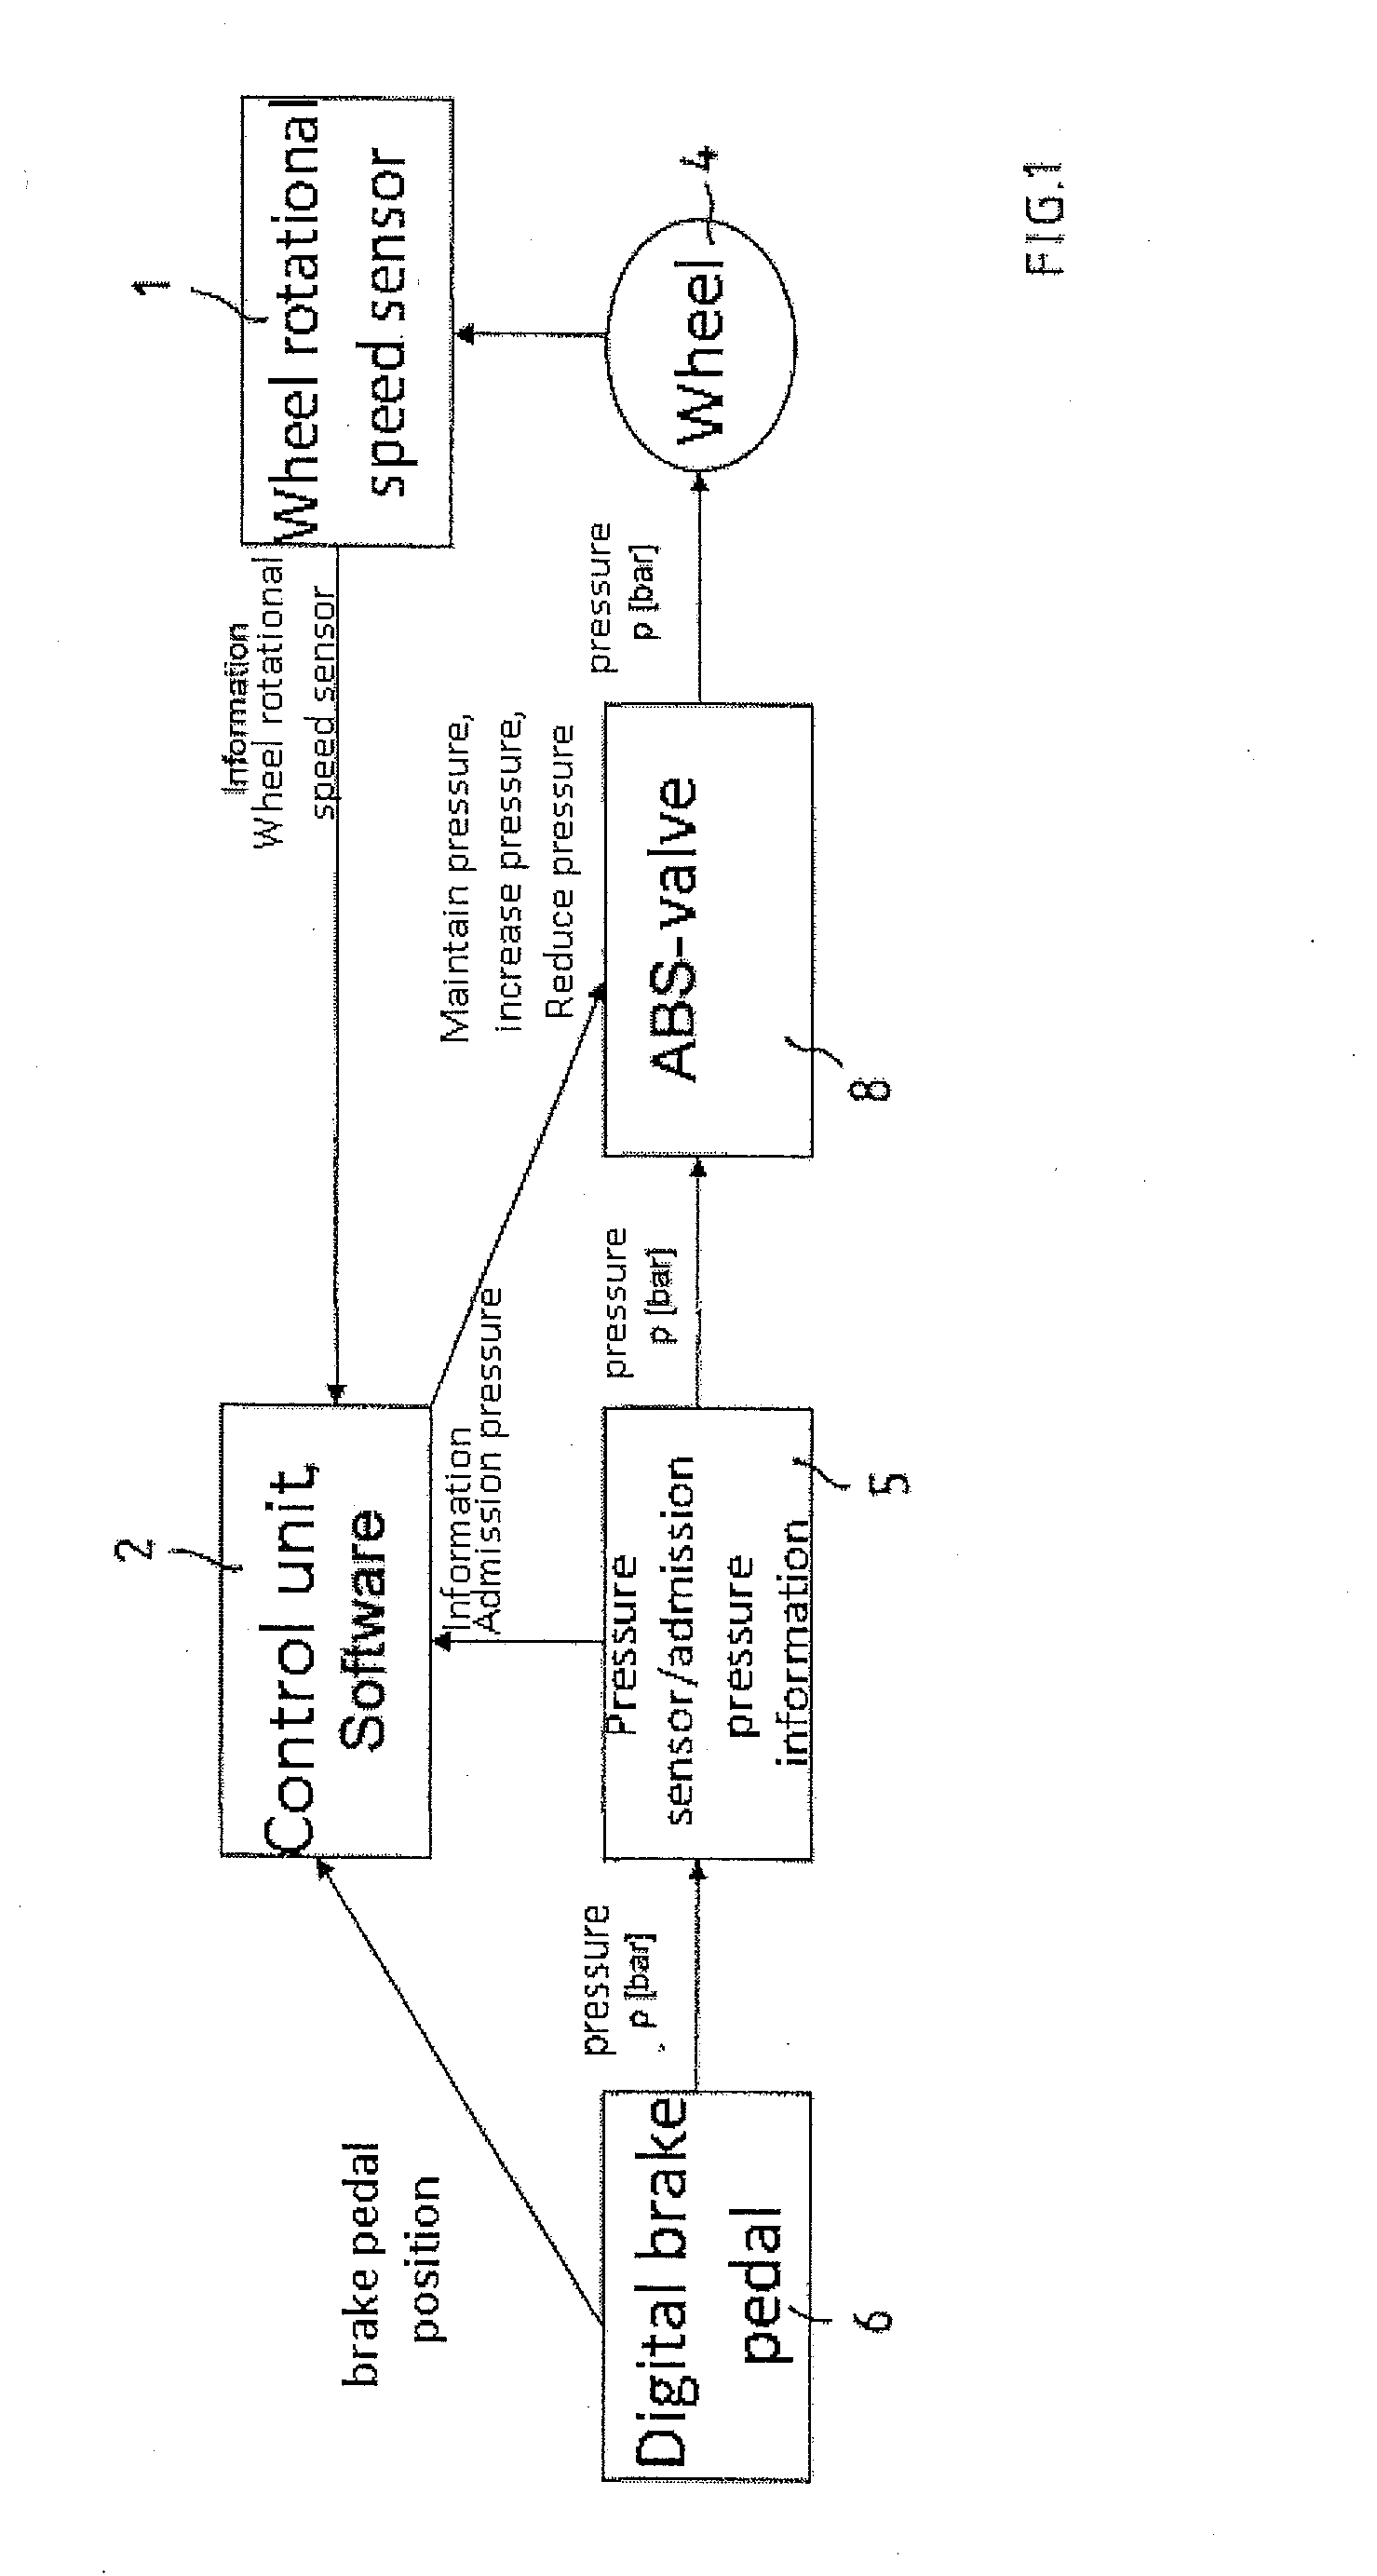 Method for determining a brake pressure value on the basis of characteristic curves